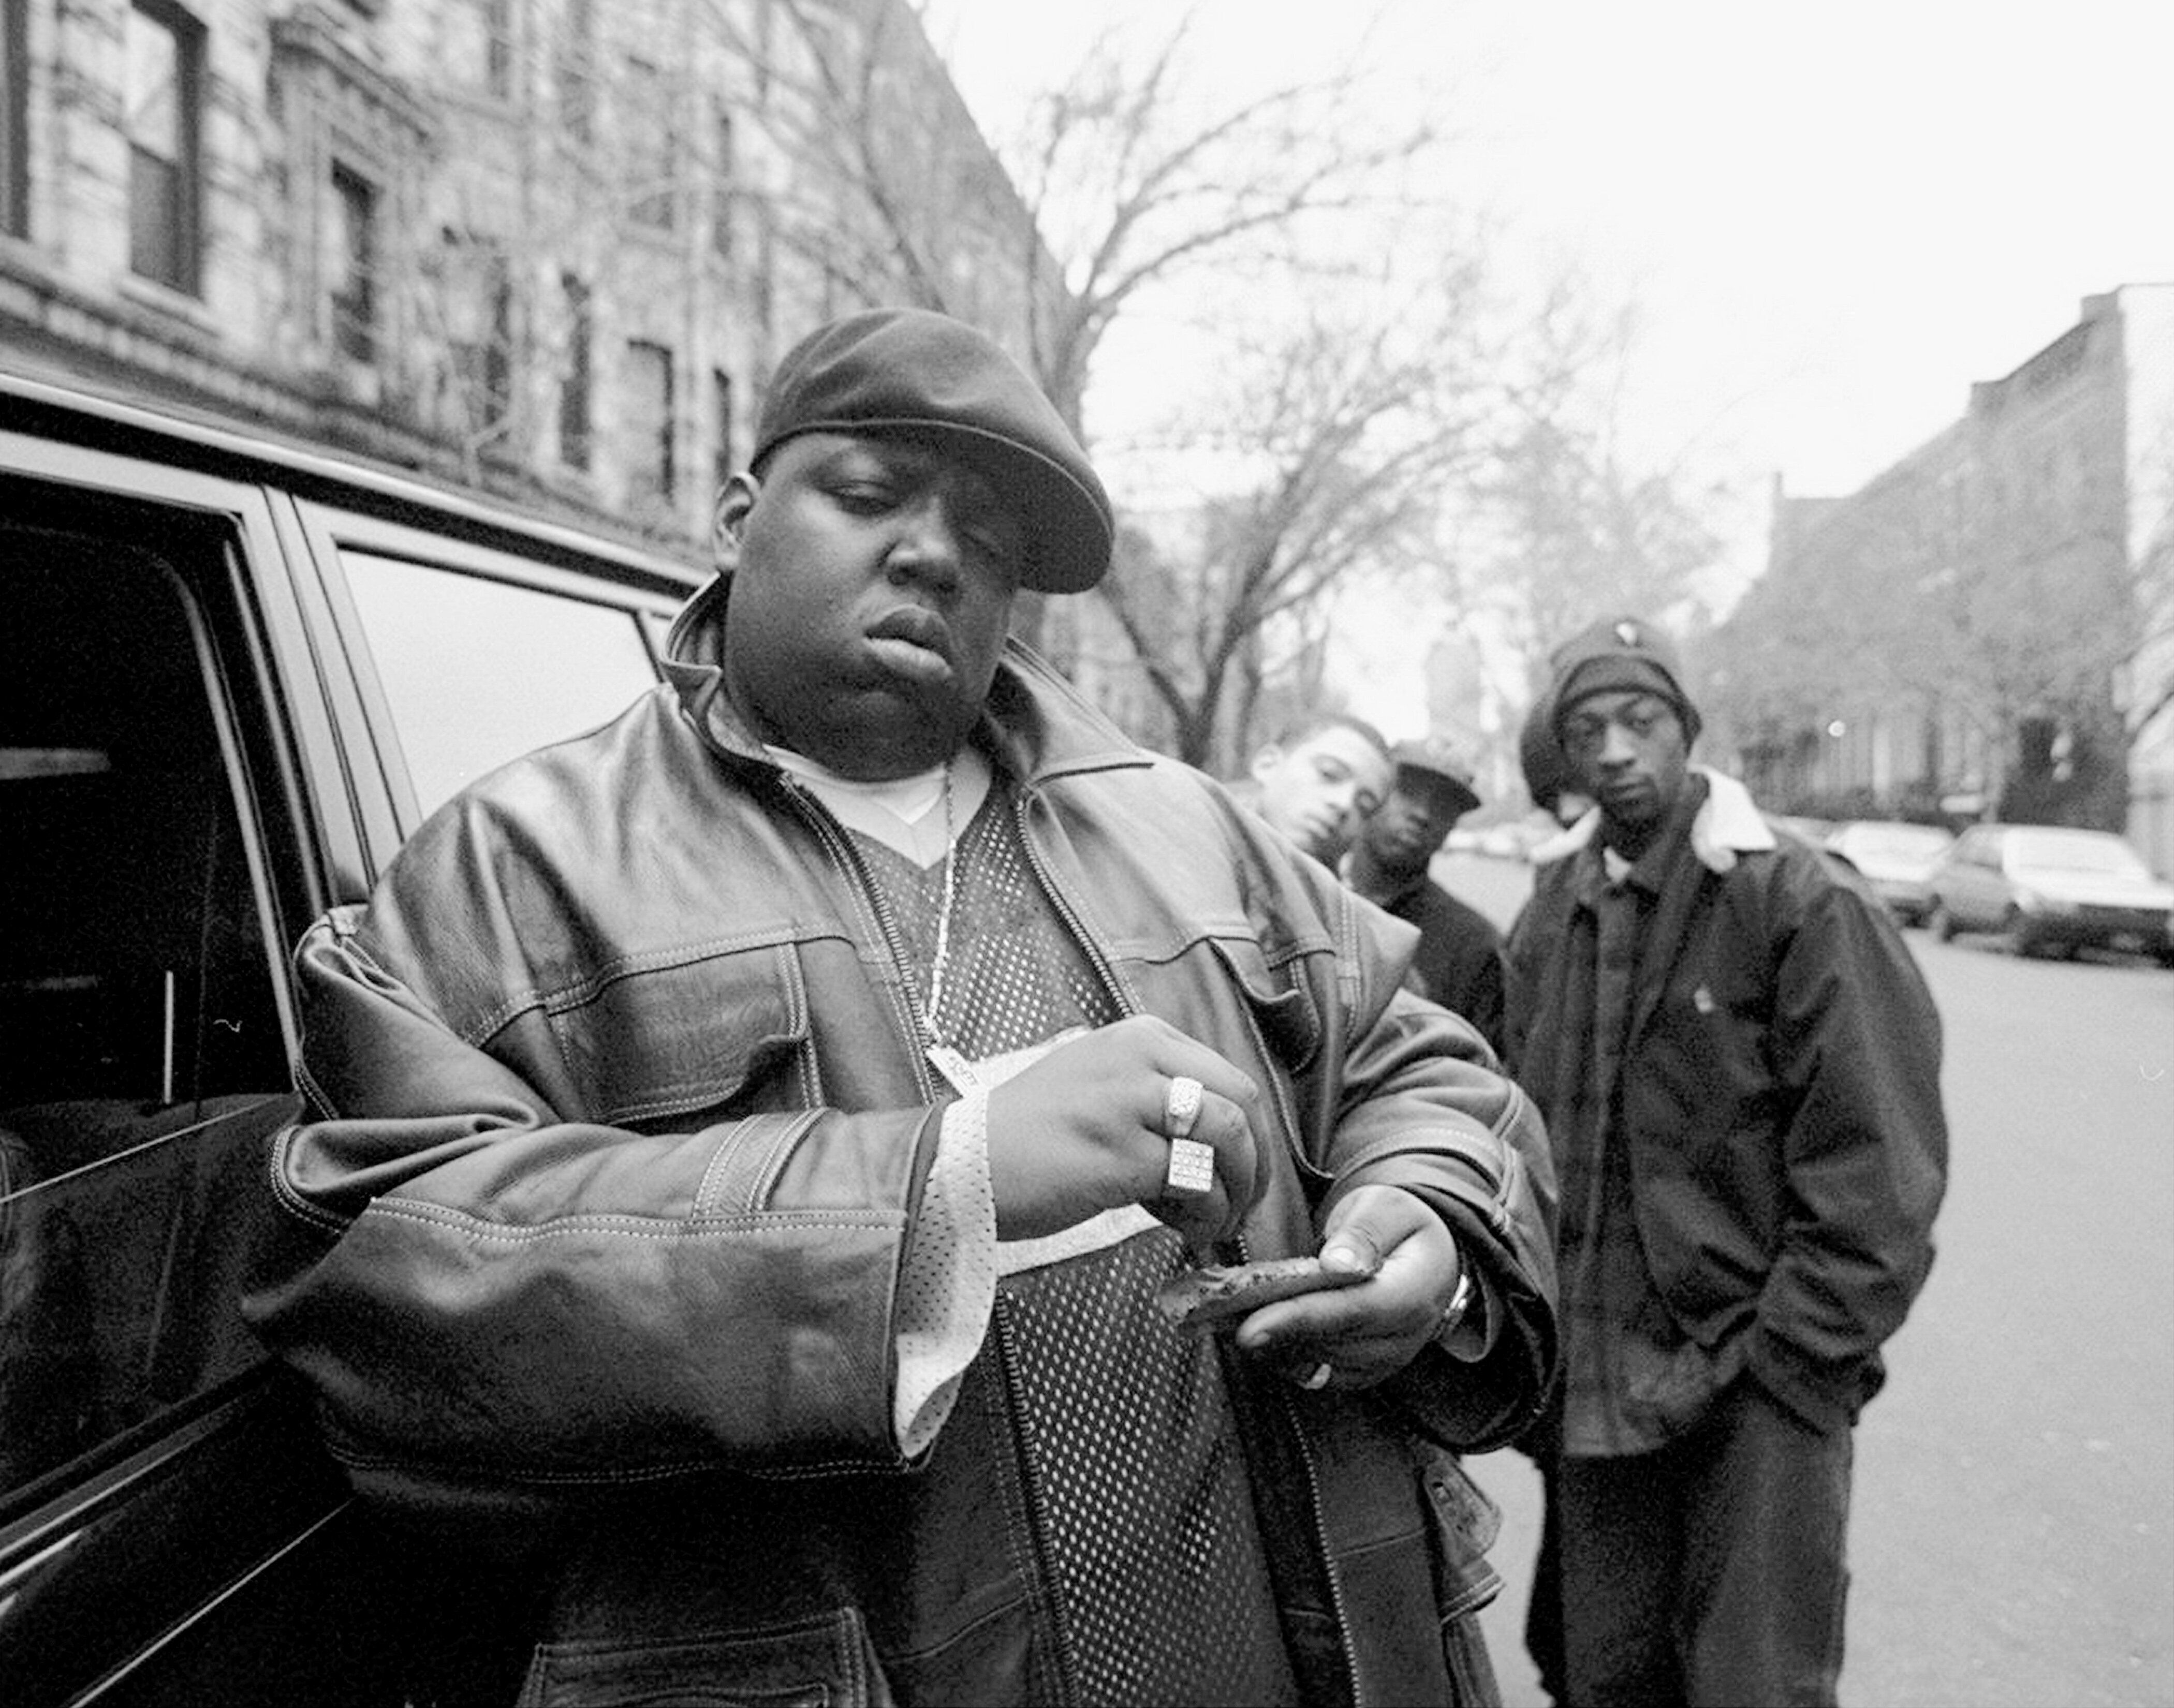 American rapper Notorious B.I.G., also known as Biggie Smalls, whose legal name was Chris Wallace, rolls a cigar-looking item outside his mother's house in Brooklyn, New York, Jan. 18, 1995.